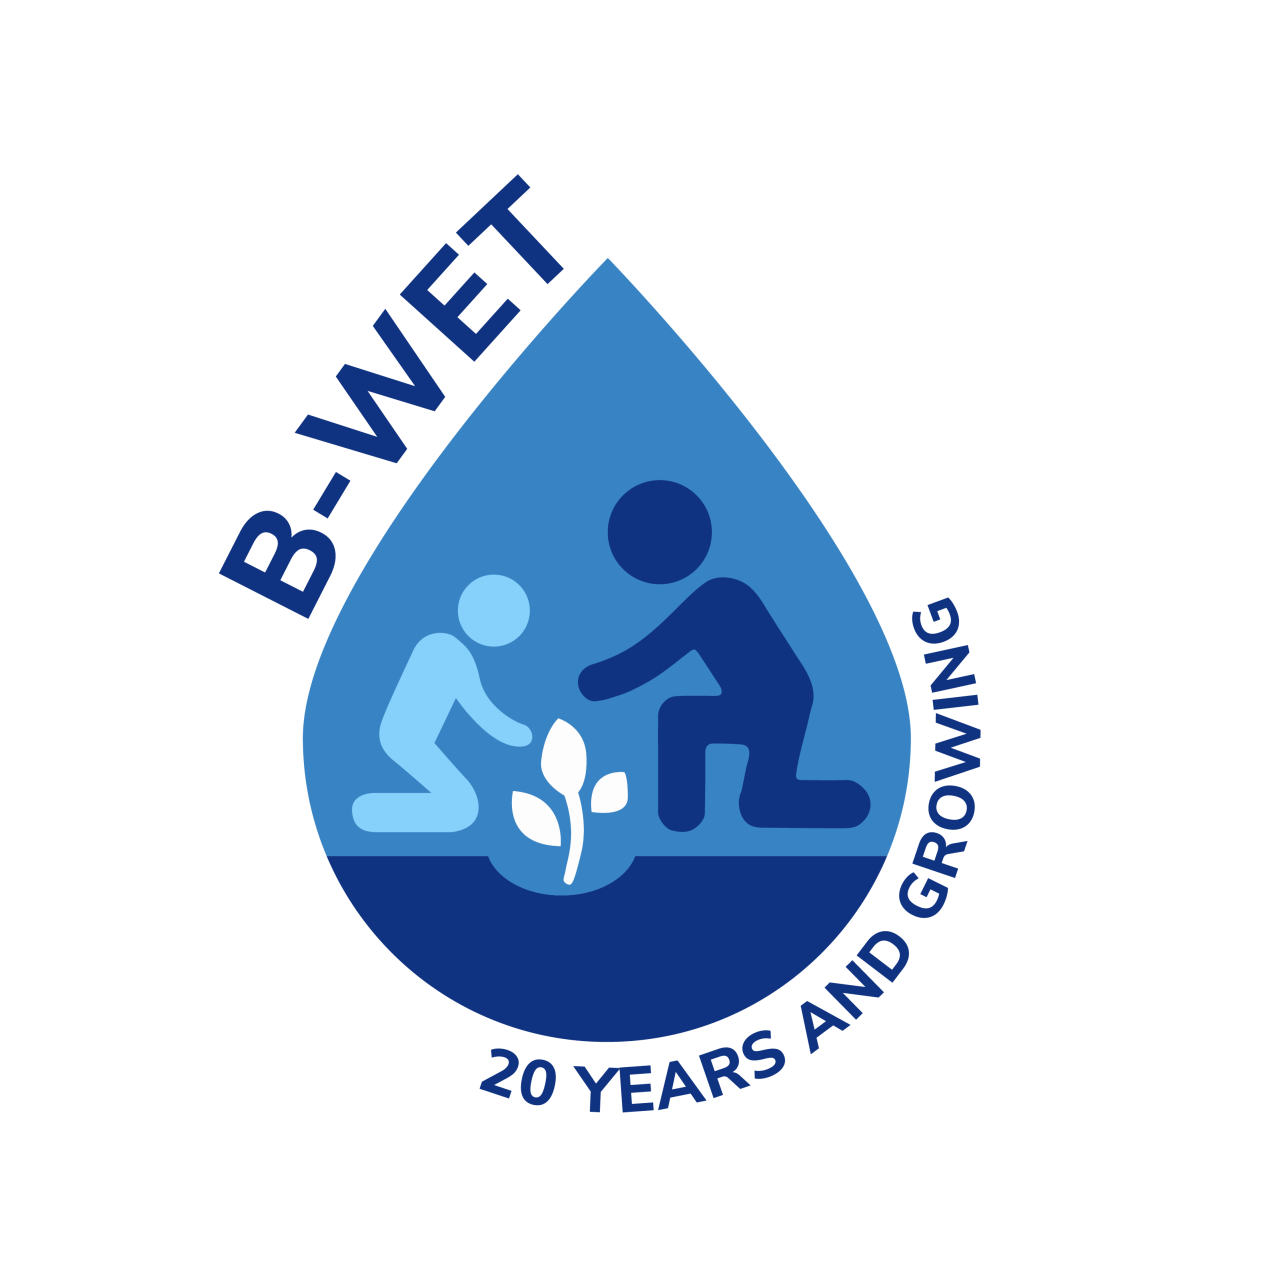 B-WET’s 20th Anniversary logo: It reads “B-WET 20 years and growing.” To the left of the text is a water drop shape and inside there a sketch of two people kneeling with a plant between them.